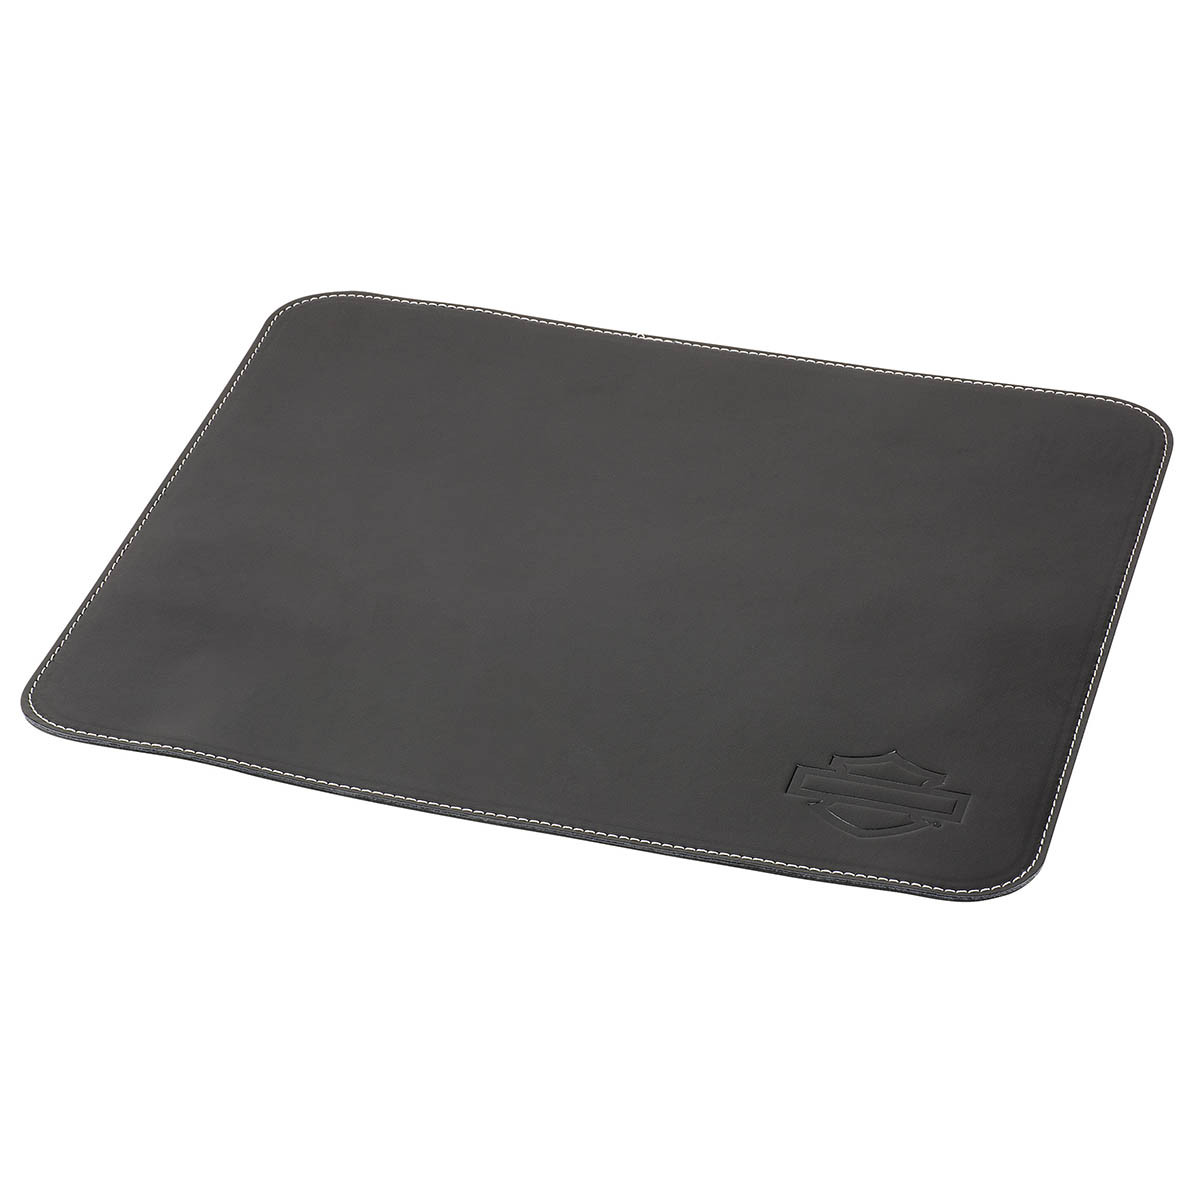 HARLEY DAVIDSON OPEN B&S MOUSE PAD